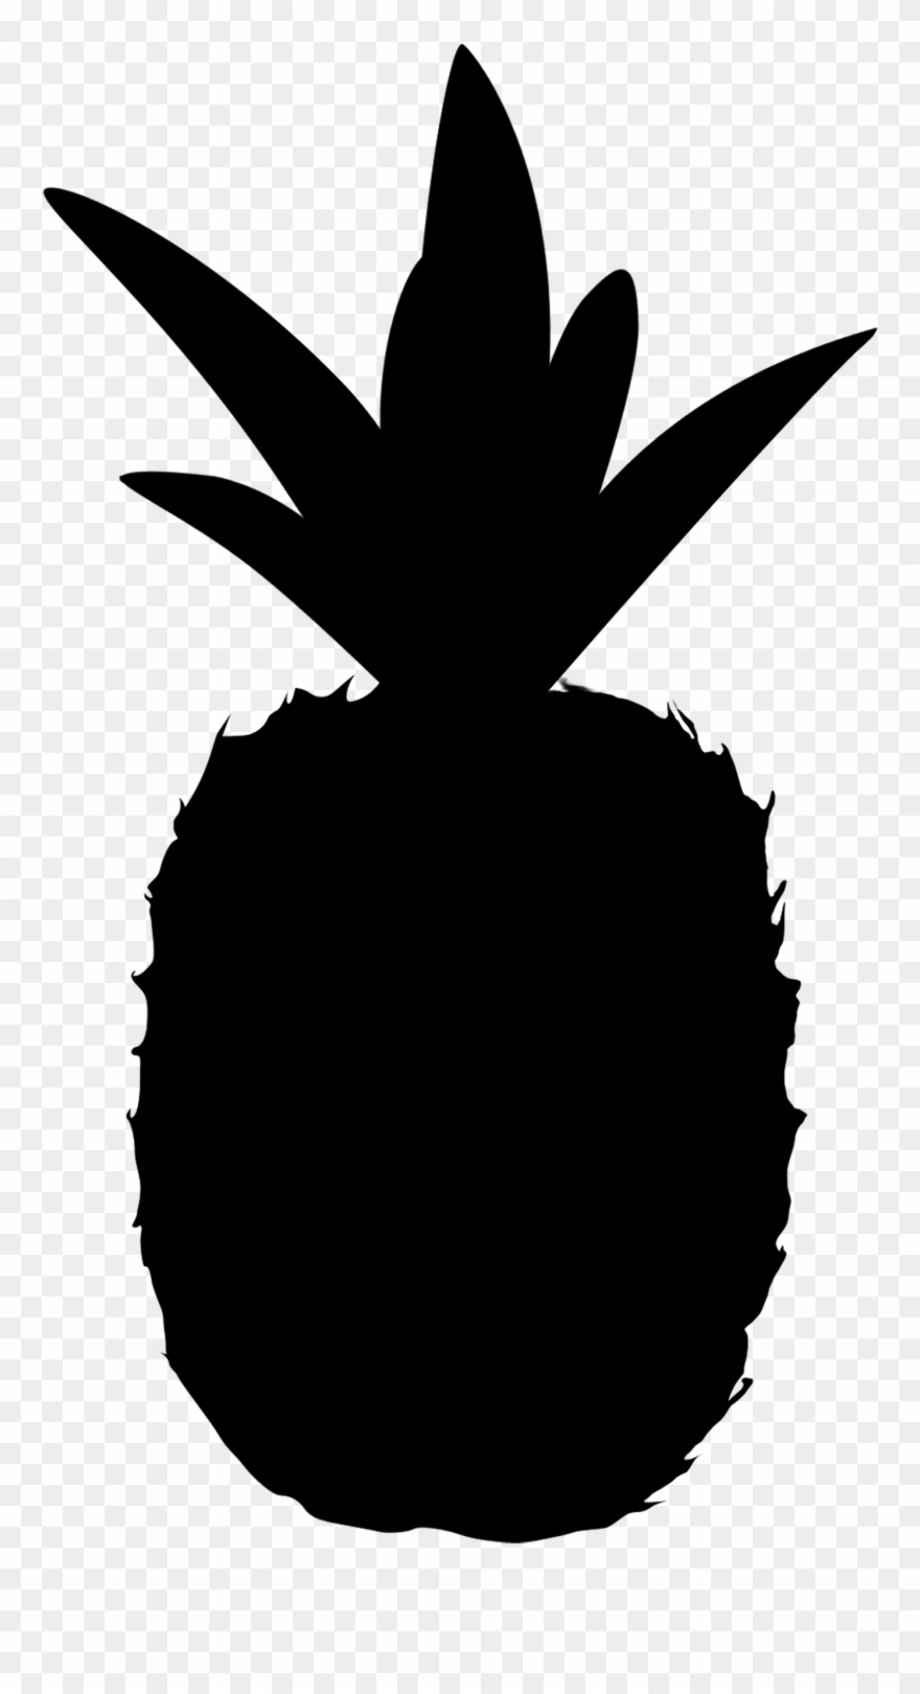 Download Download High Quality pineapple clipart silhouette Transparent PNG Images - Art Prim clip arts 2019